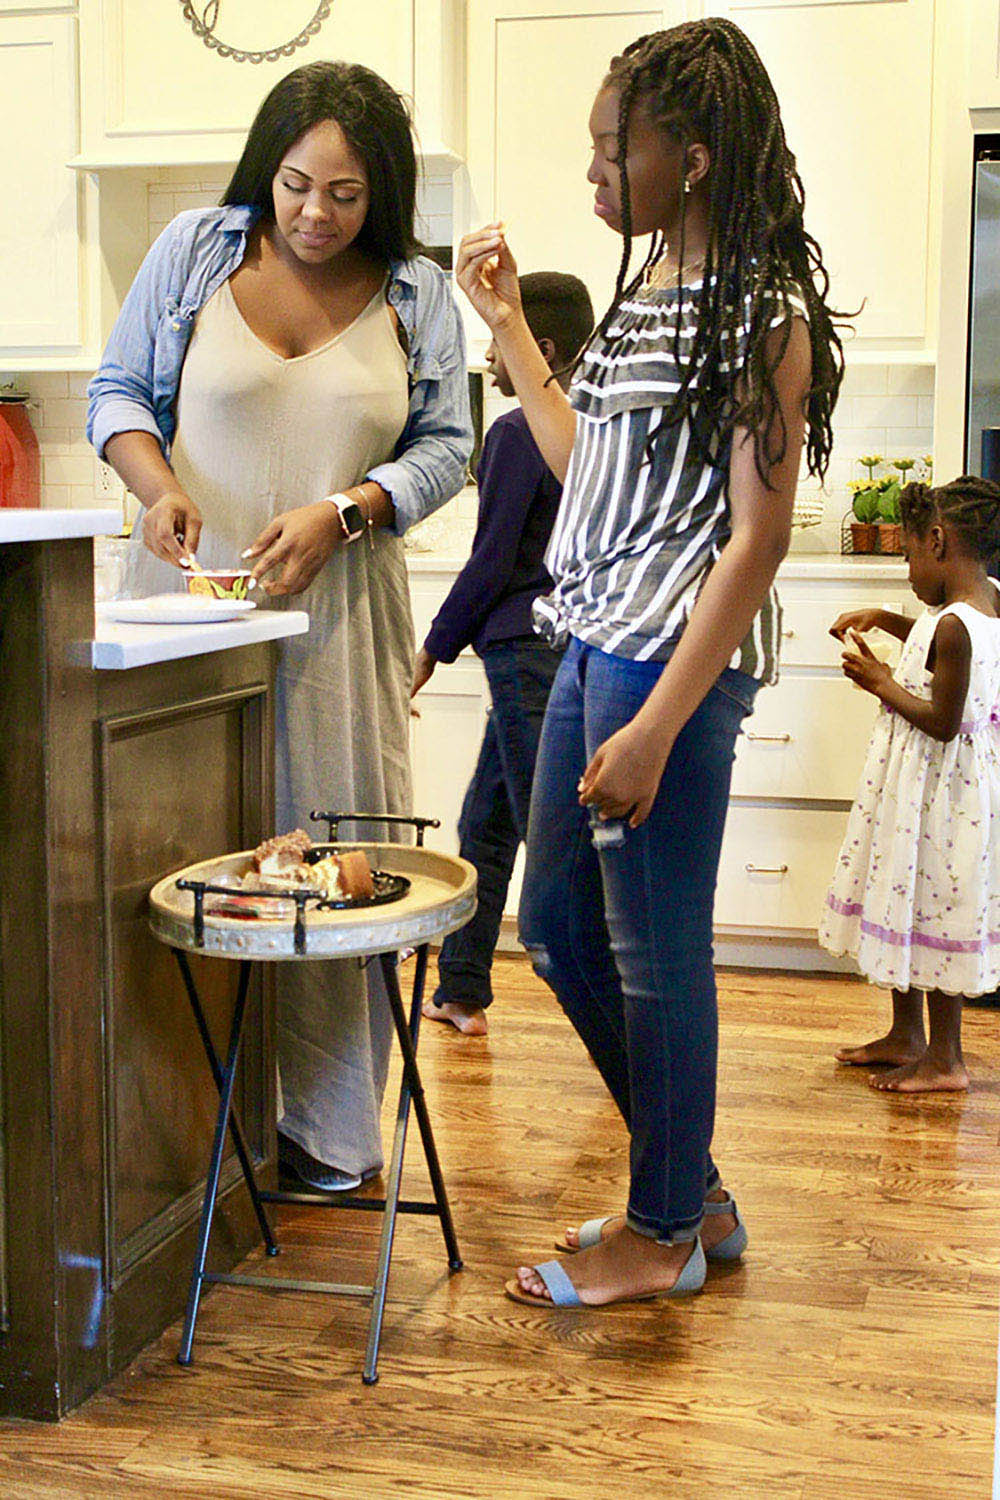 Two women standing in a kitchen with a small child behind them.